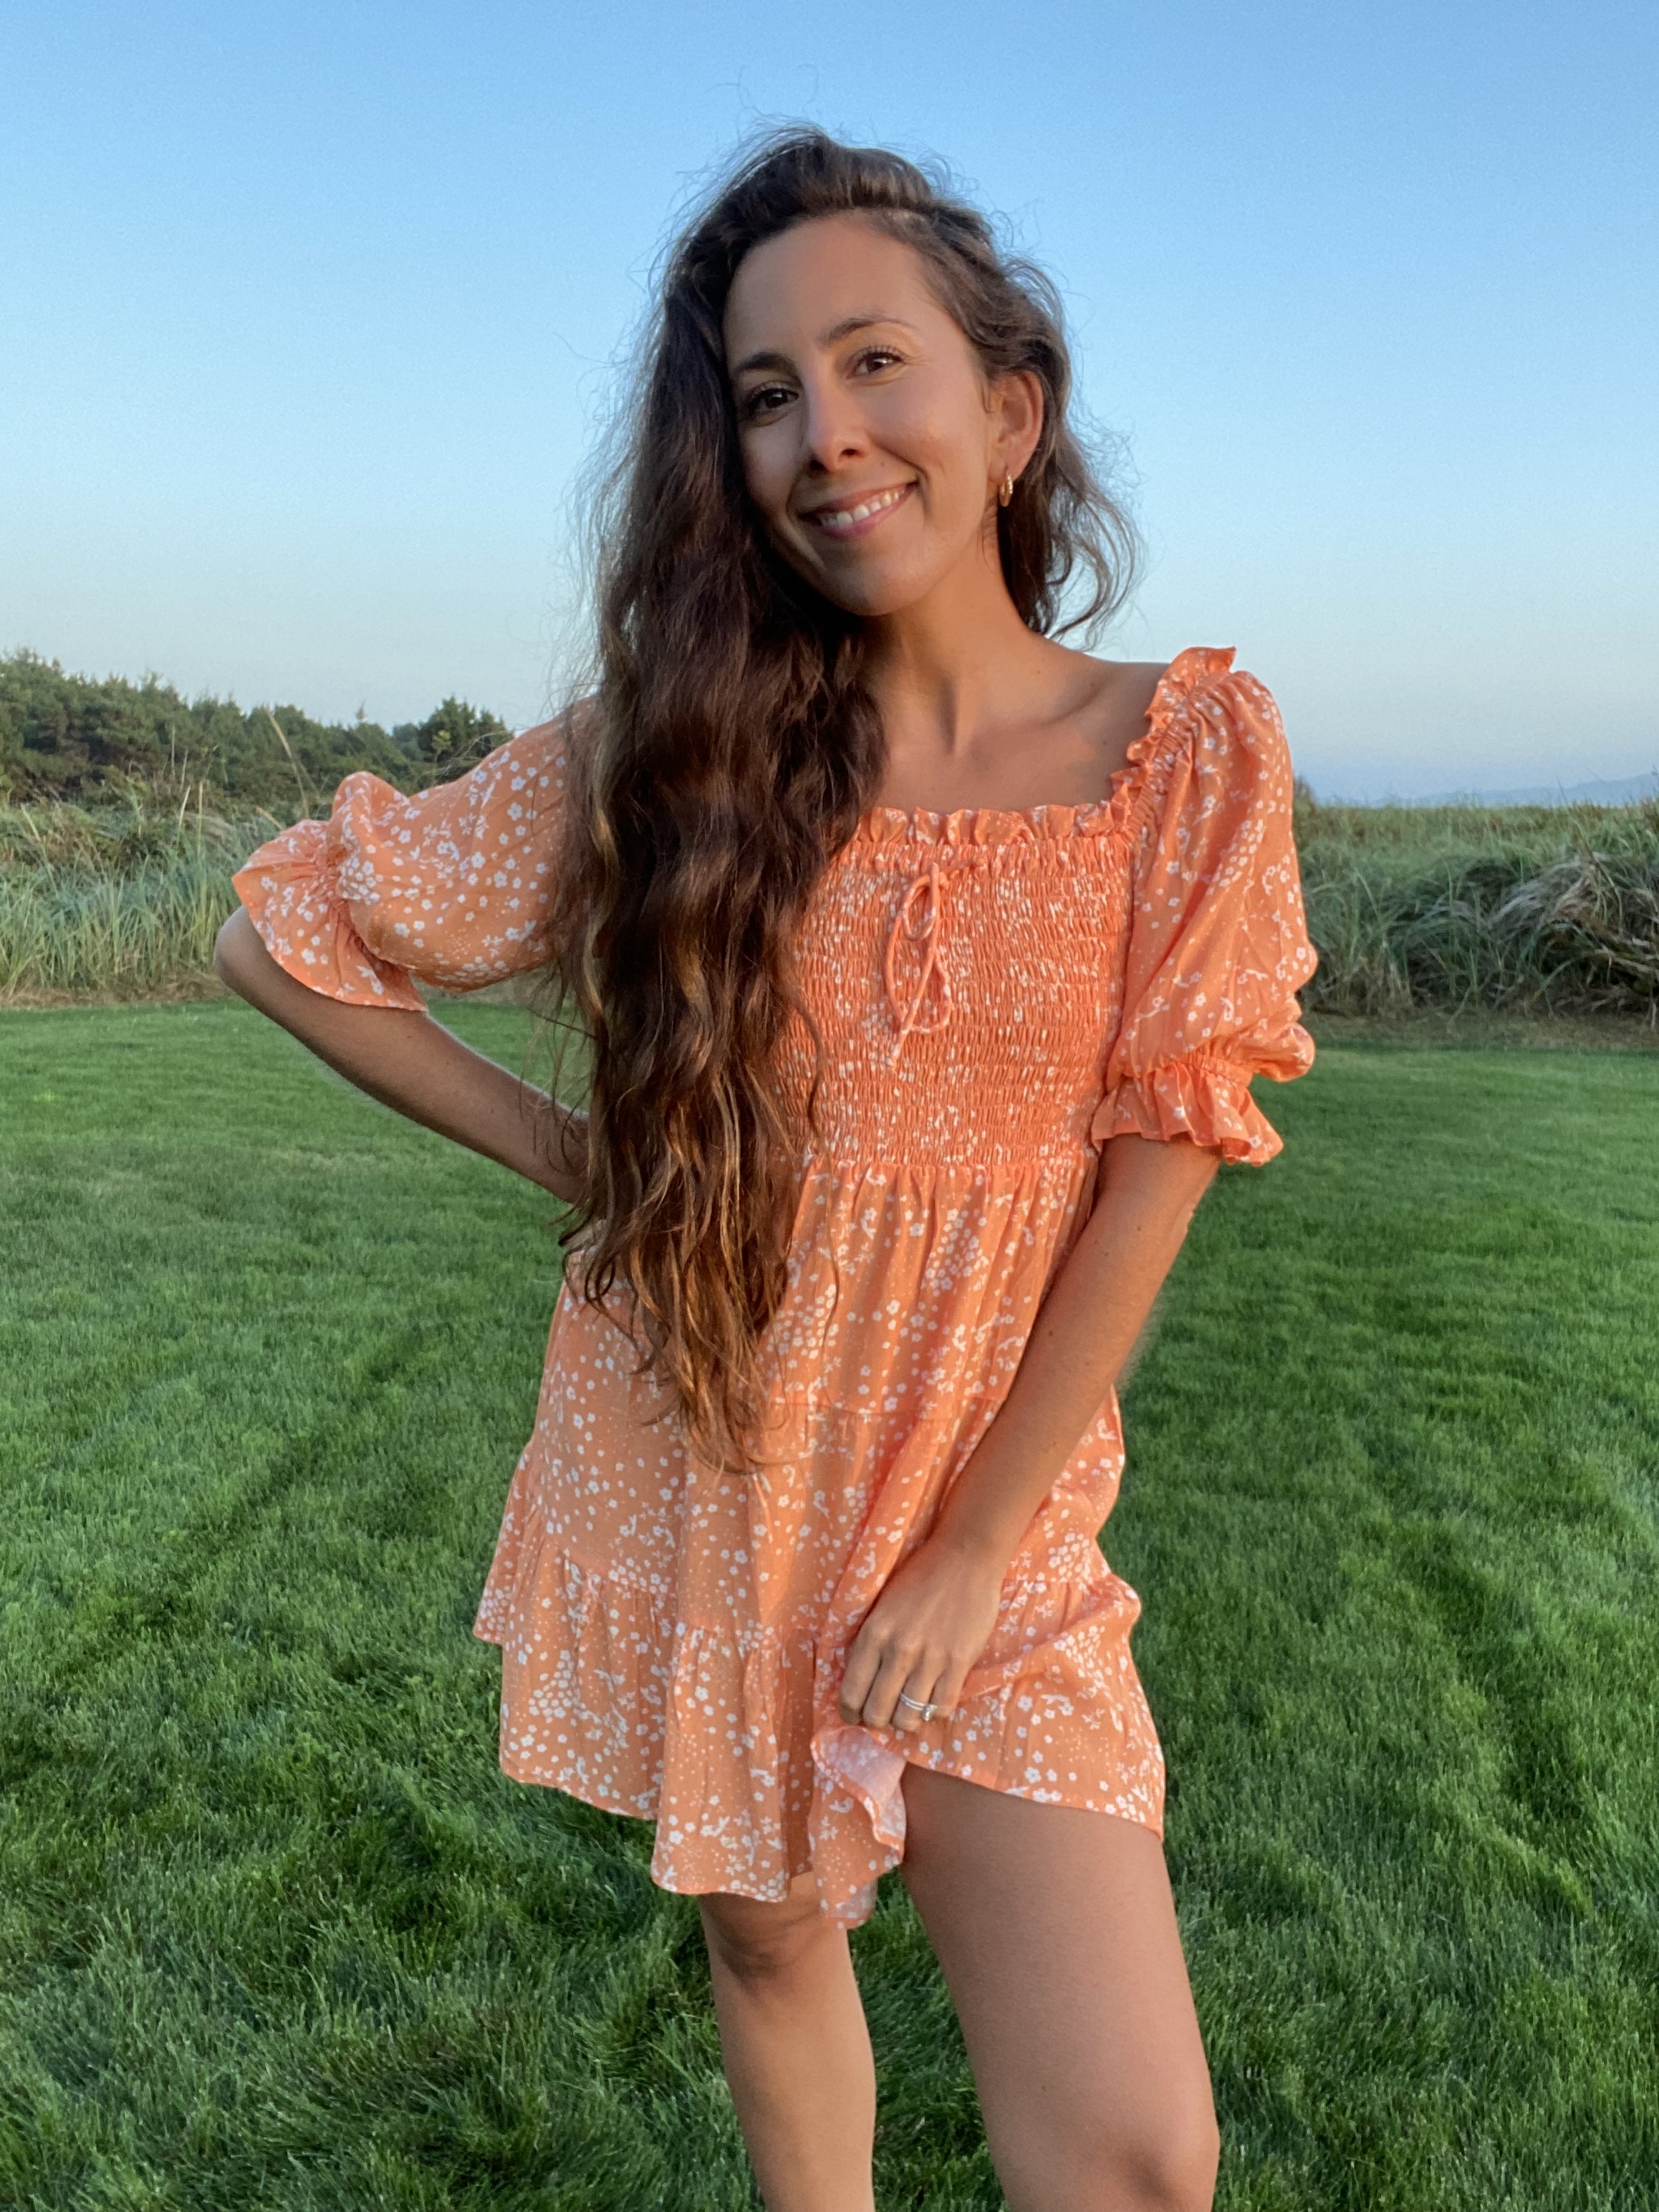 A woman standing in a field of grass feeling blissfully happy and in her worth. Wearing a orange daisy dress this is sustainably made.